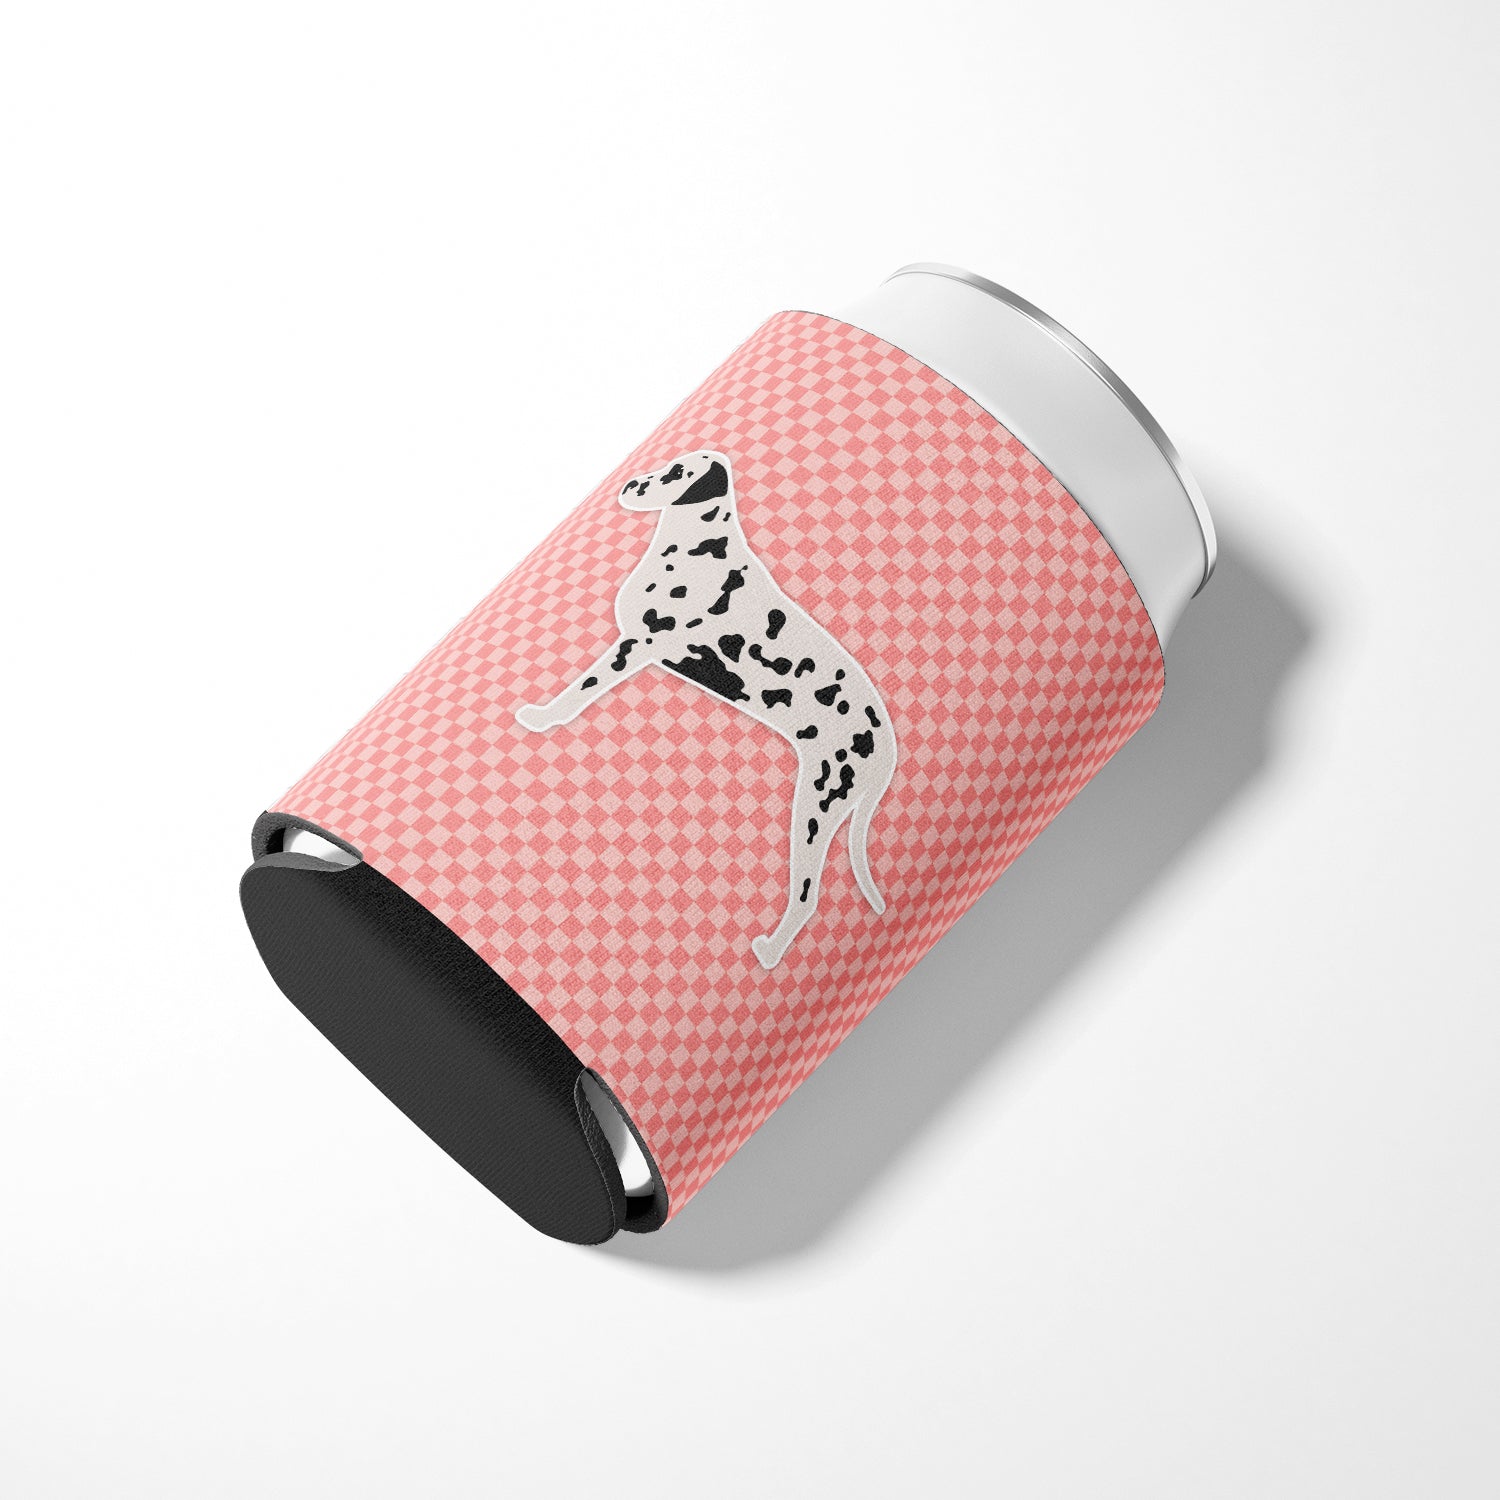 Dalmatian Checkerboard Pink Can or Bottle Hugger BB3583CC